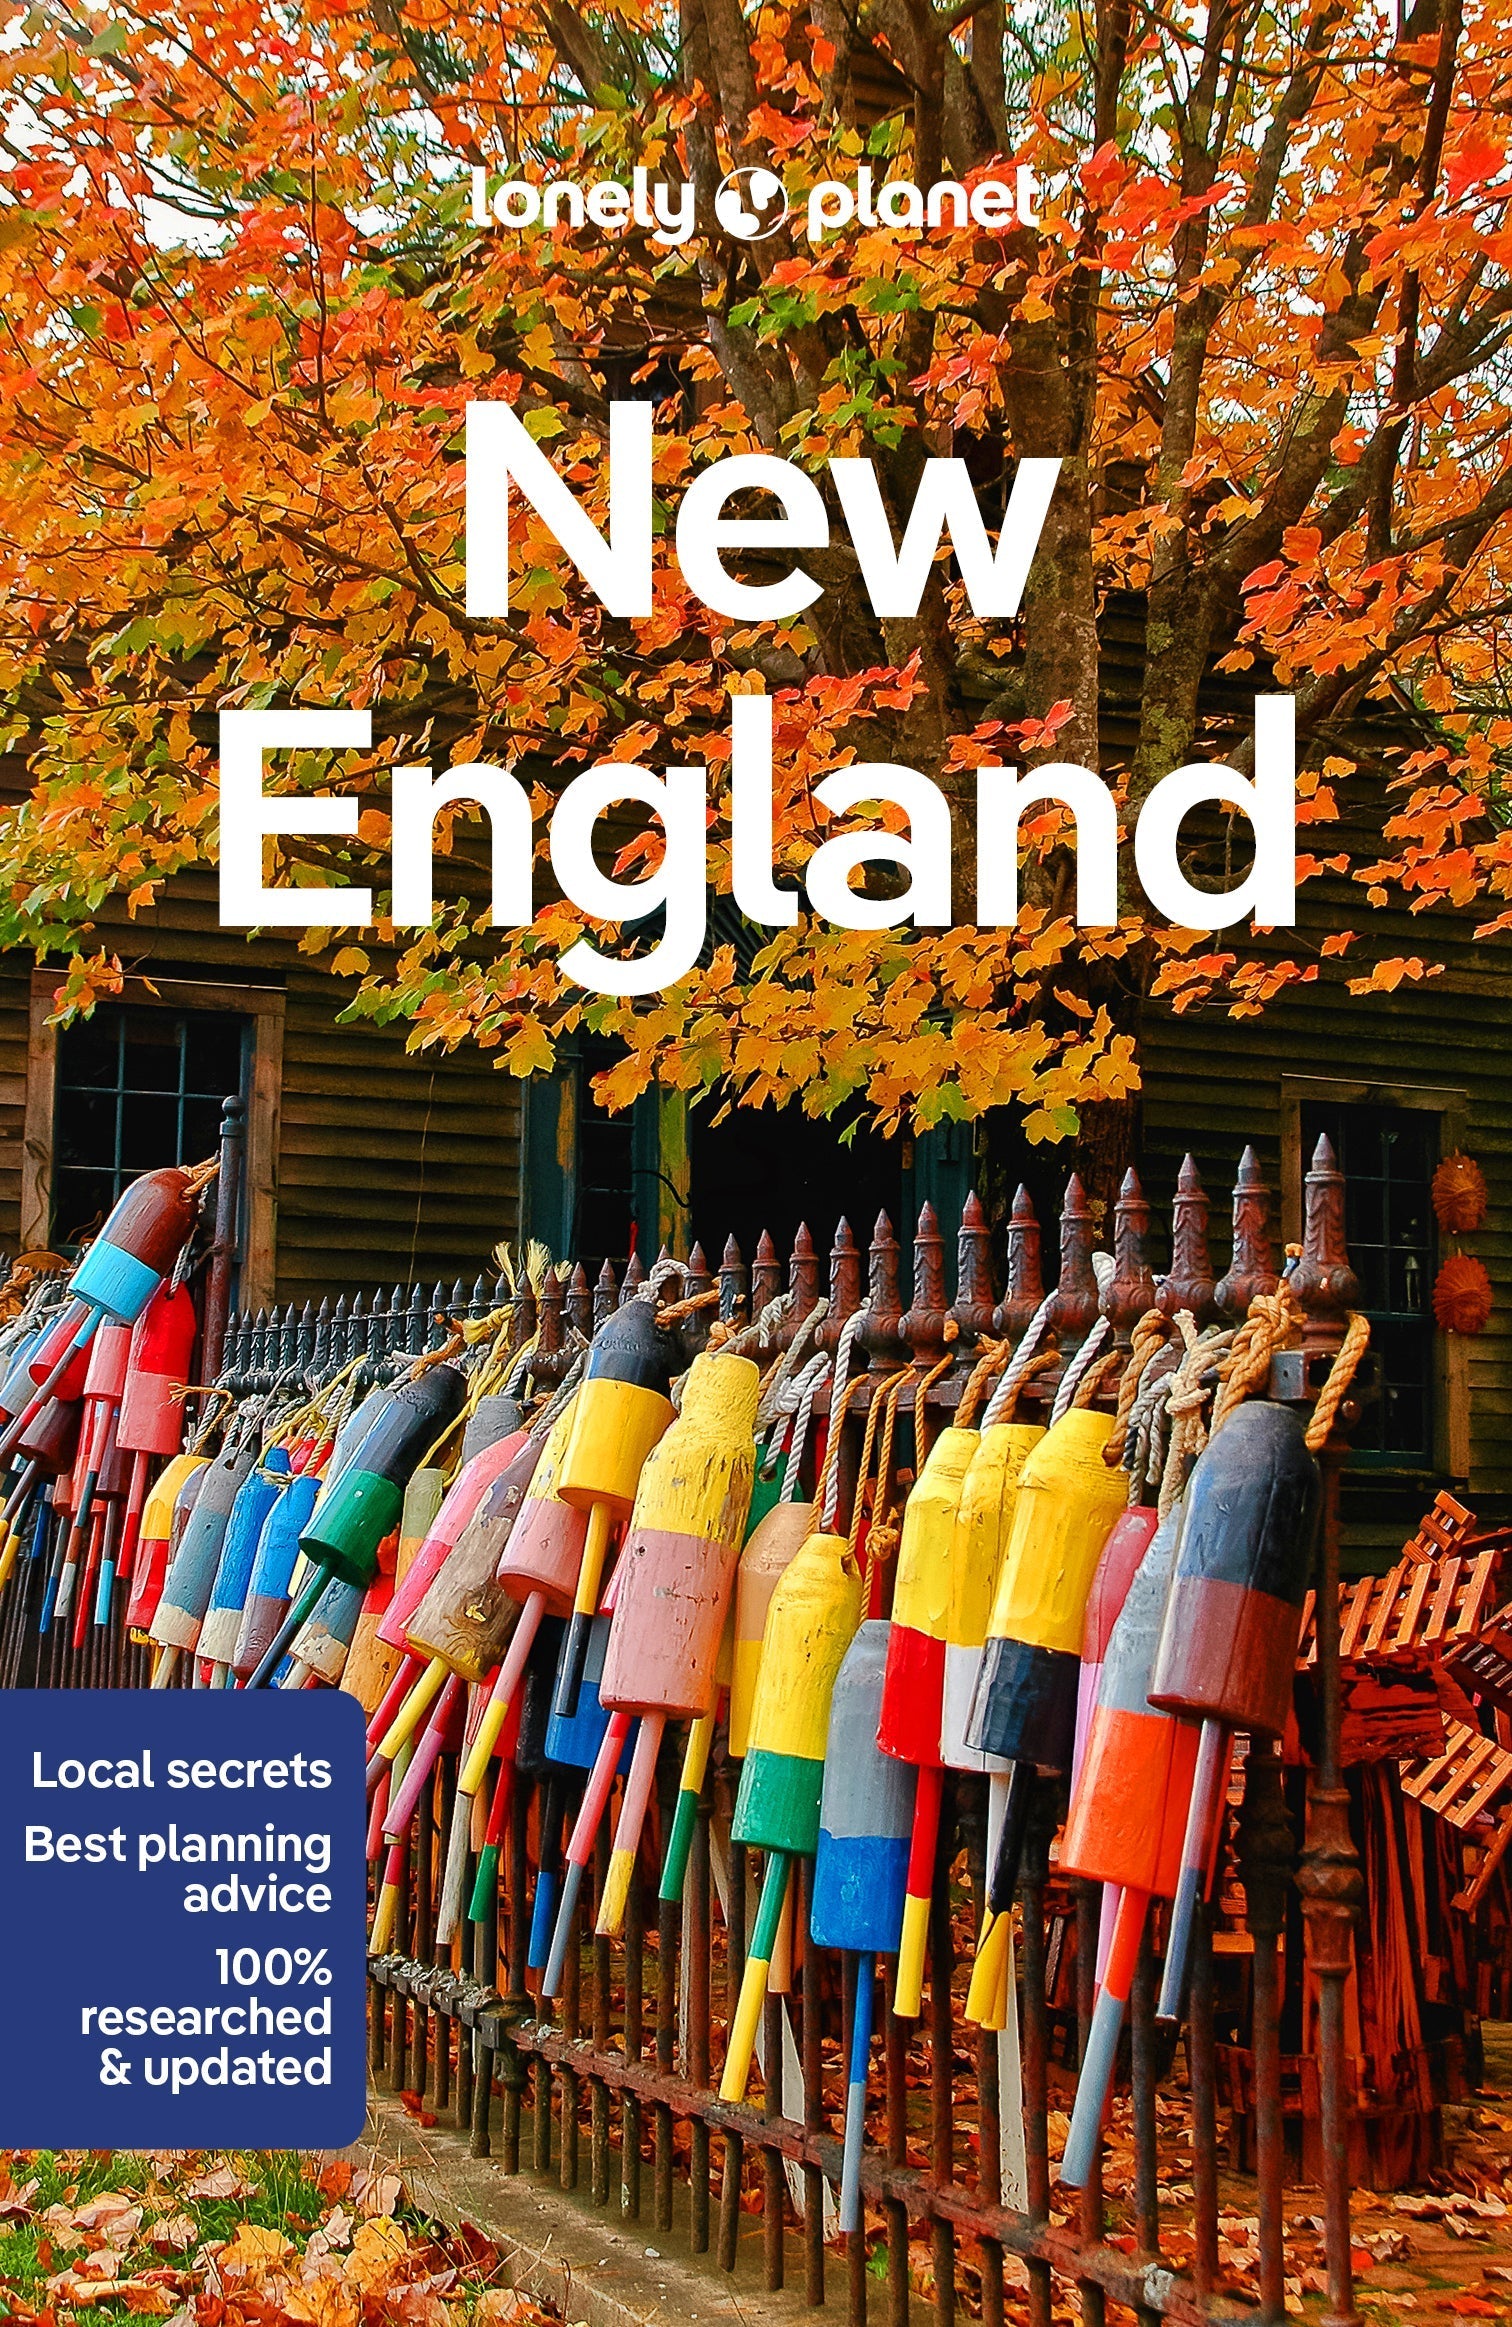 New　Book　England　Travel　and　Ebook